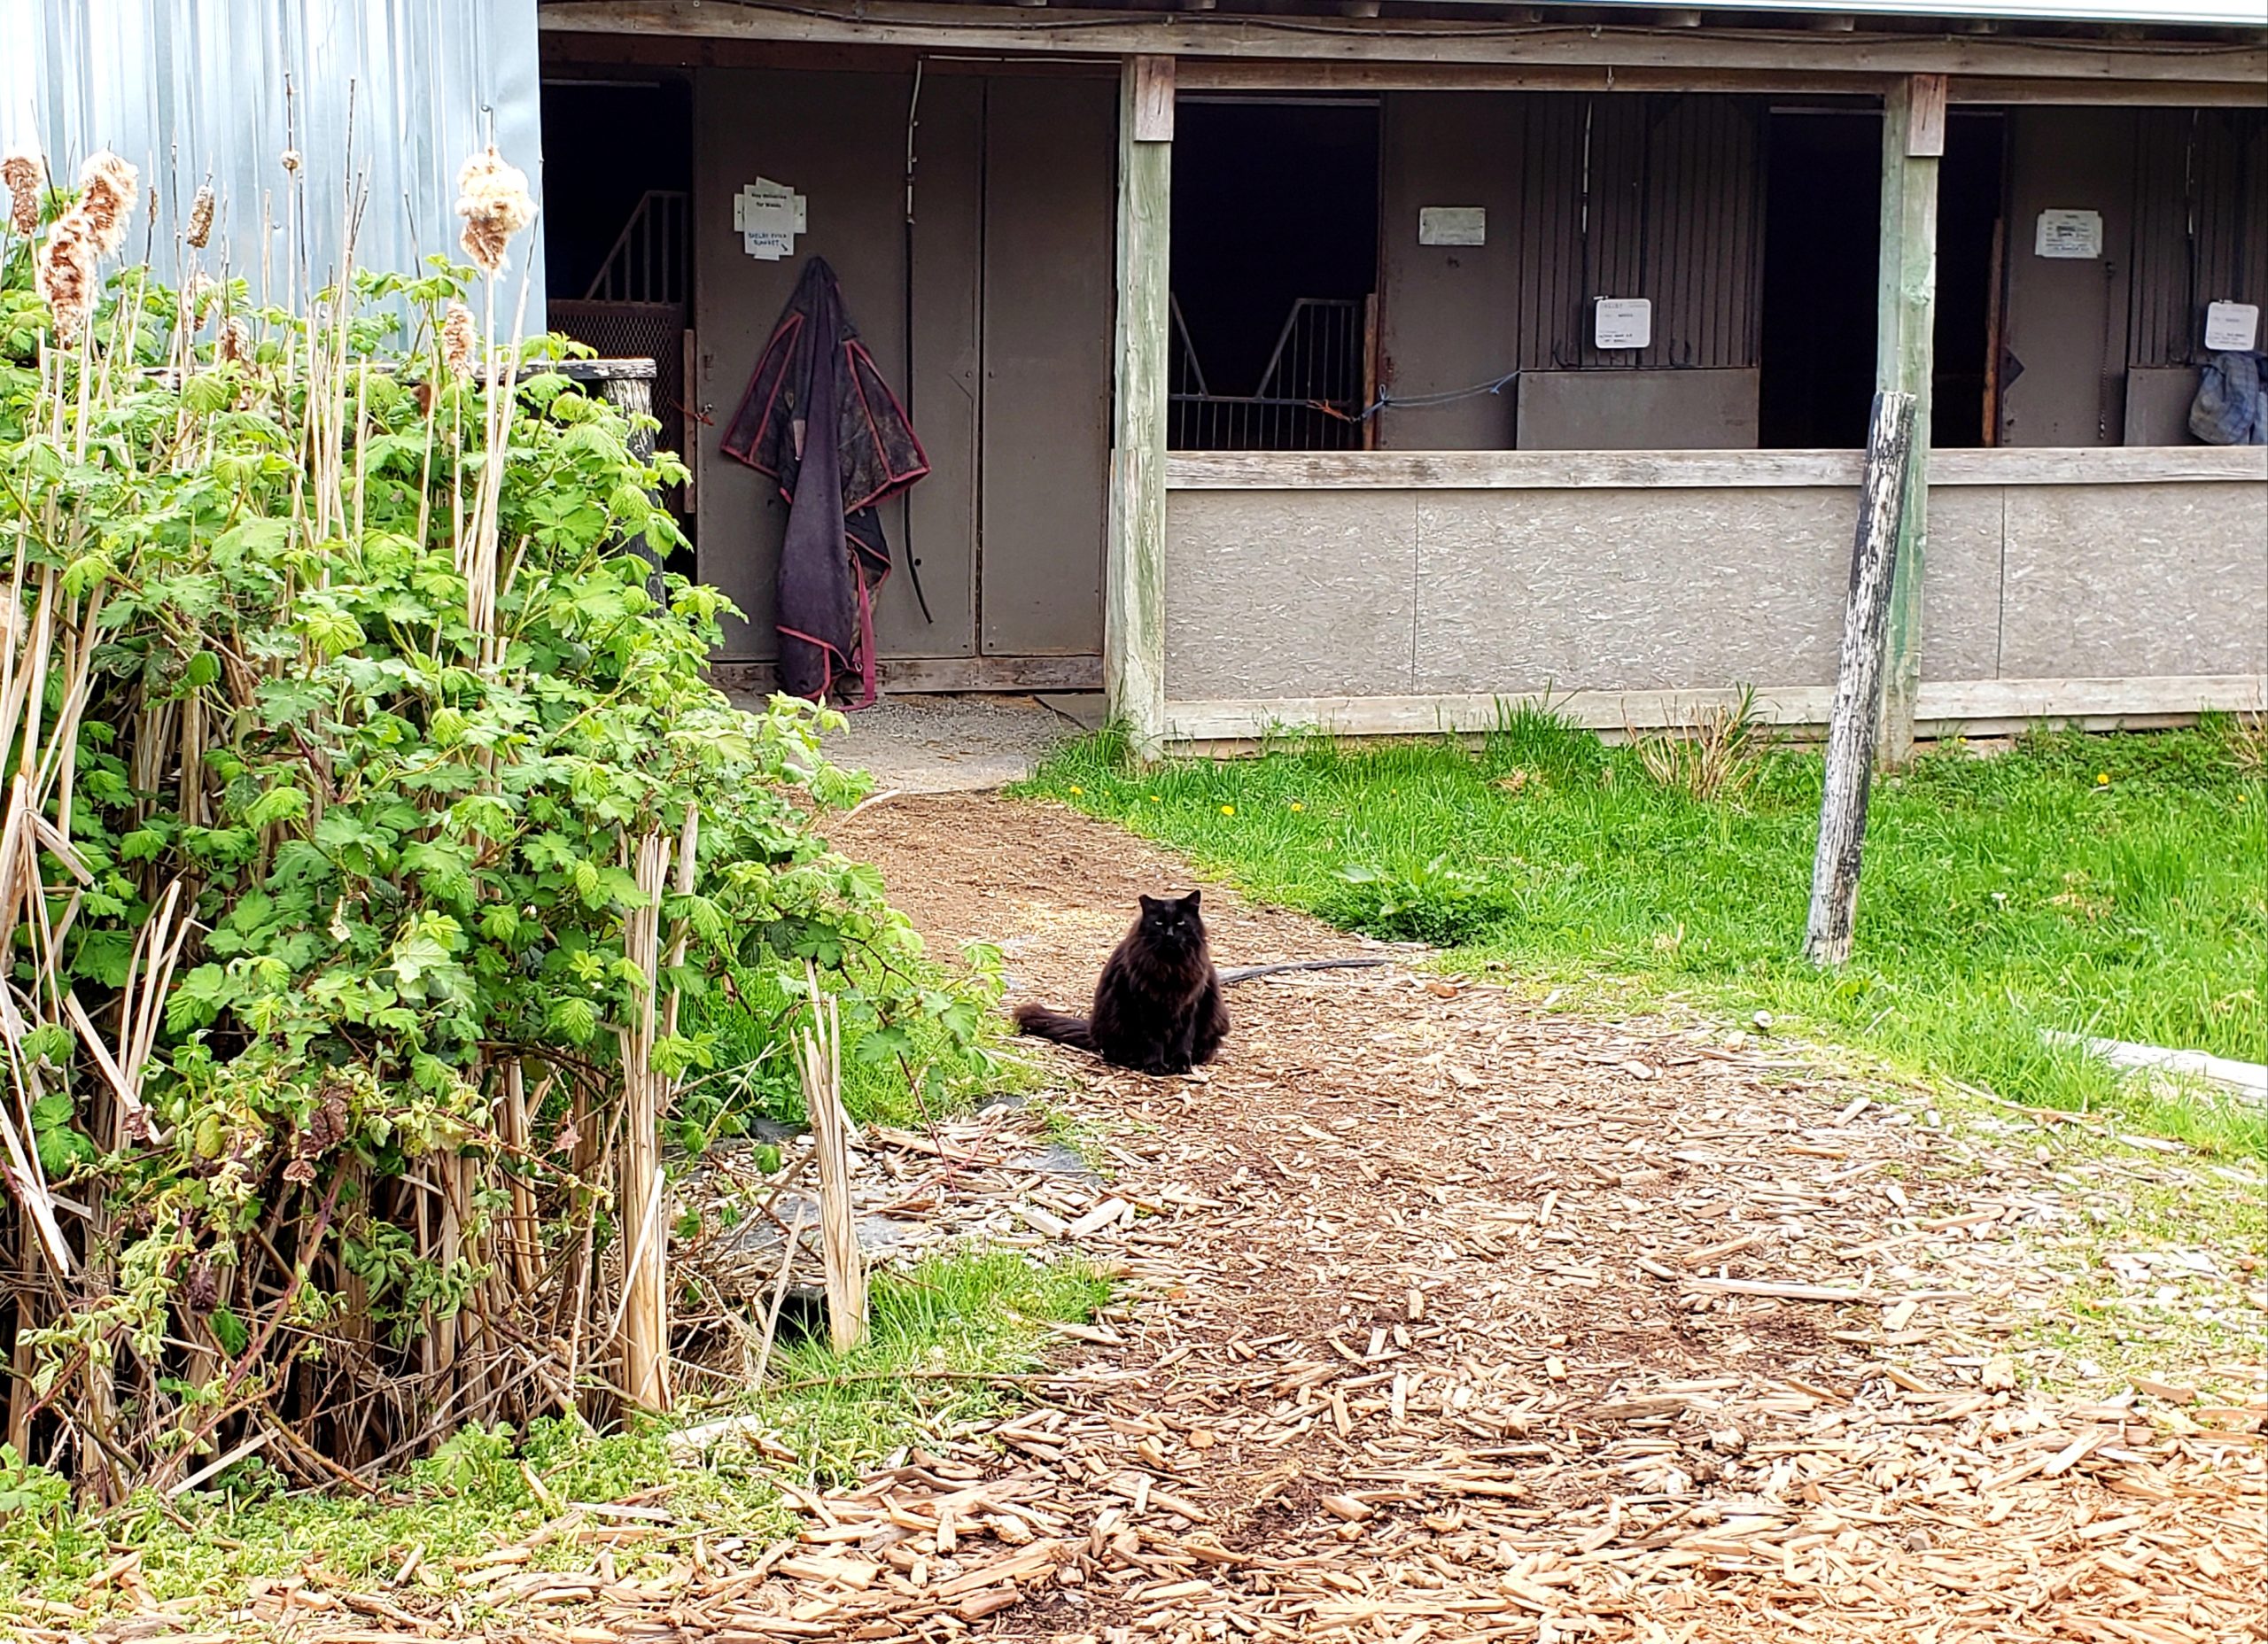 photo of a fluffy black cat sitting in front of a row of stalls at a barn